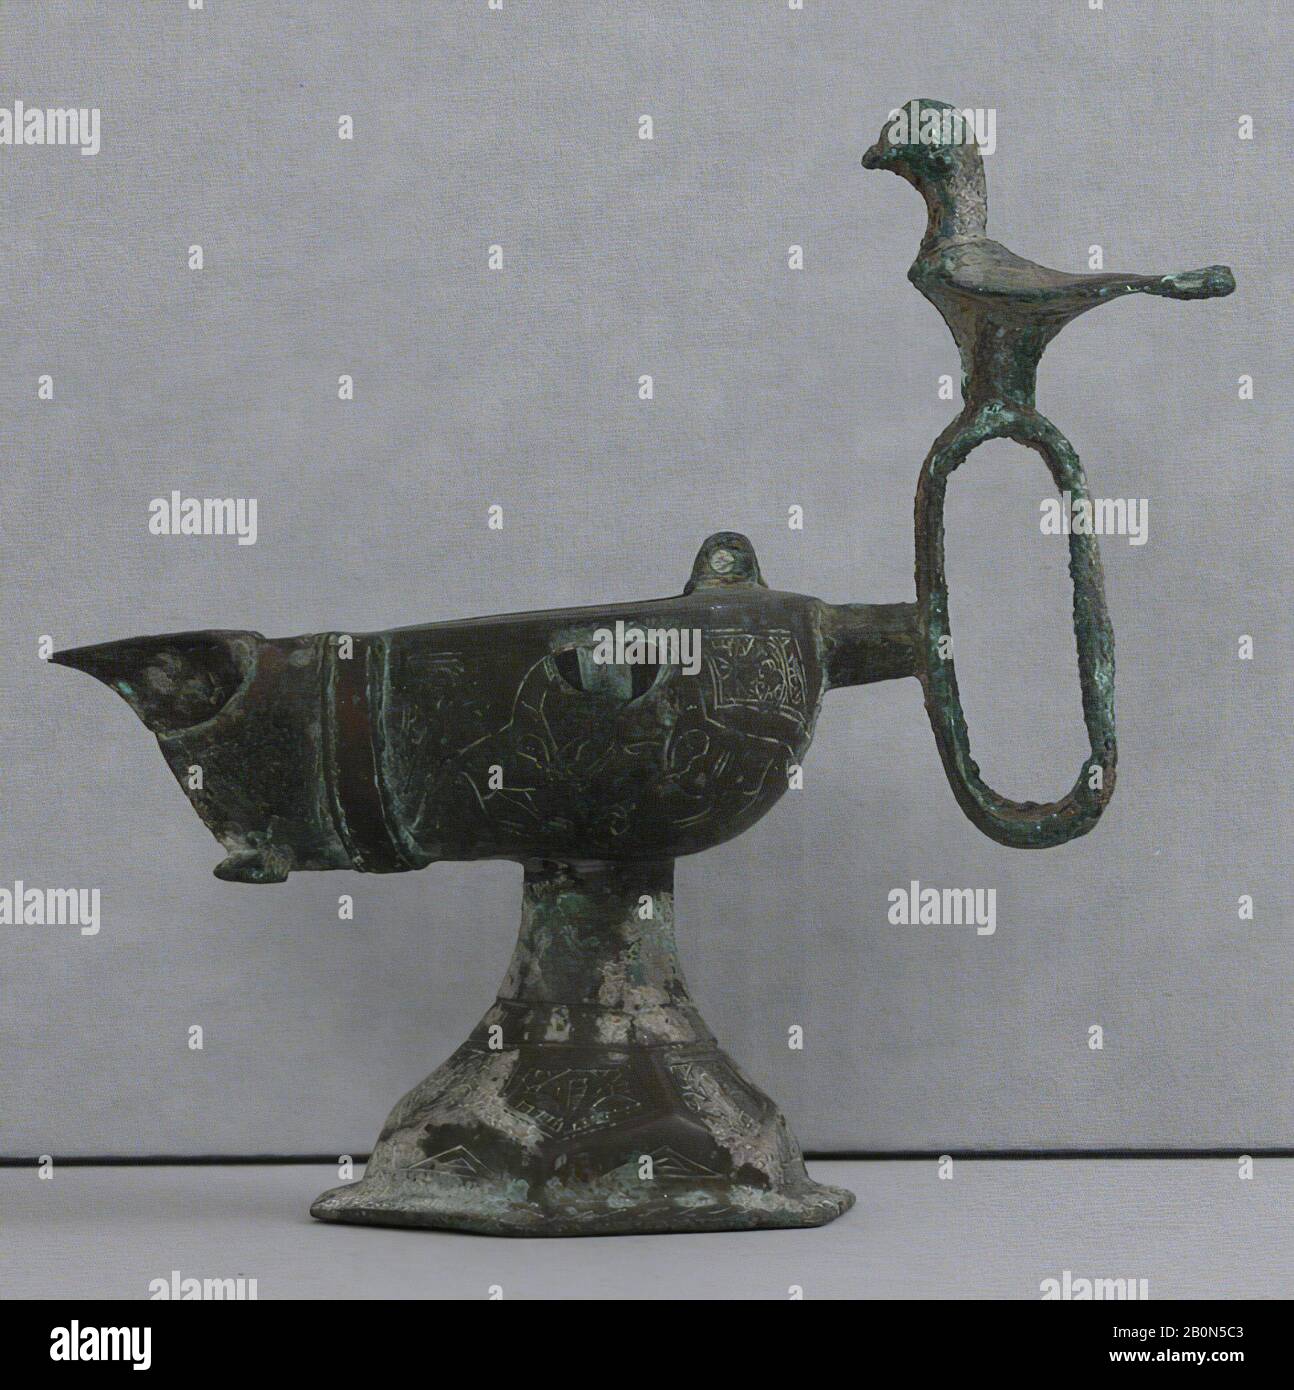 Oil Lamp, Oil lamp, 13th century, Attributed to Iran, Bronze, H. 6 1/4 in. (15.9 cm), W. 6 11/16 in. (17 cm), D. 3 3/16 in. (8.1 cm), Wt. 14.5 oz. (411.1 g), Metal Stock Photo